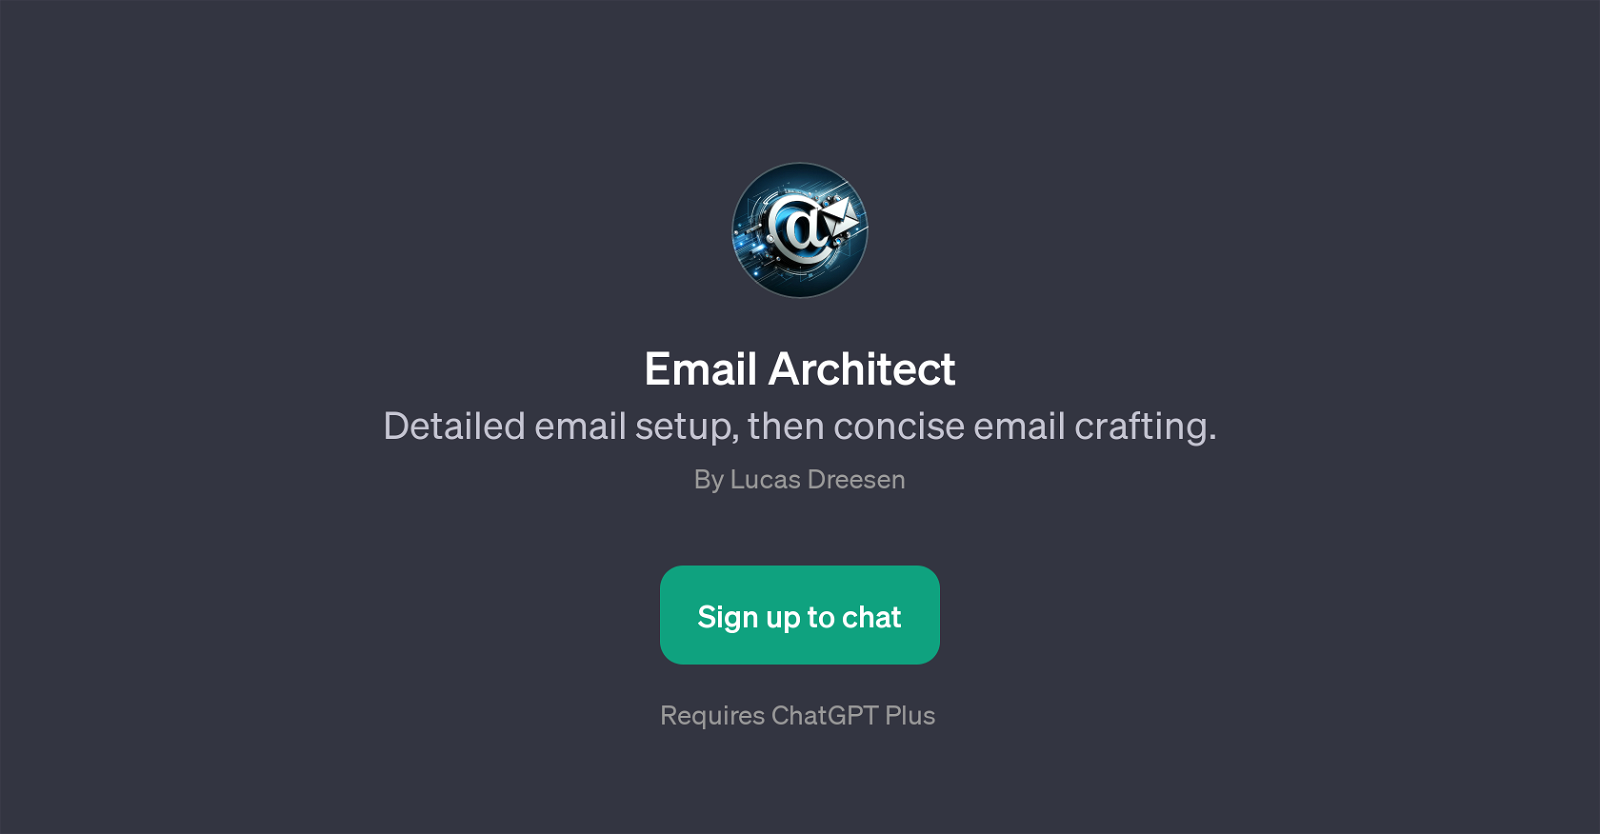 Email Architect website